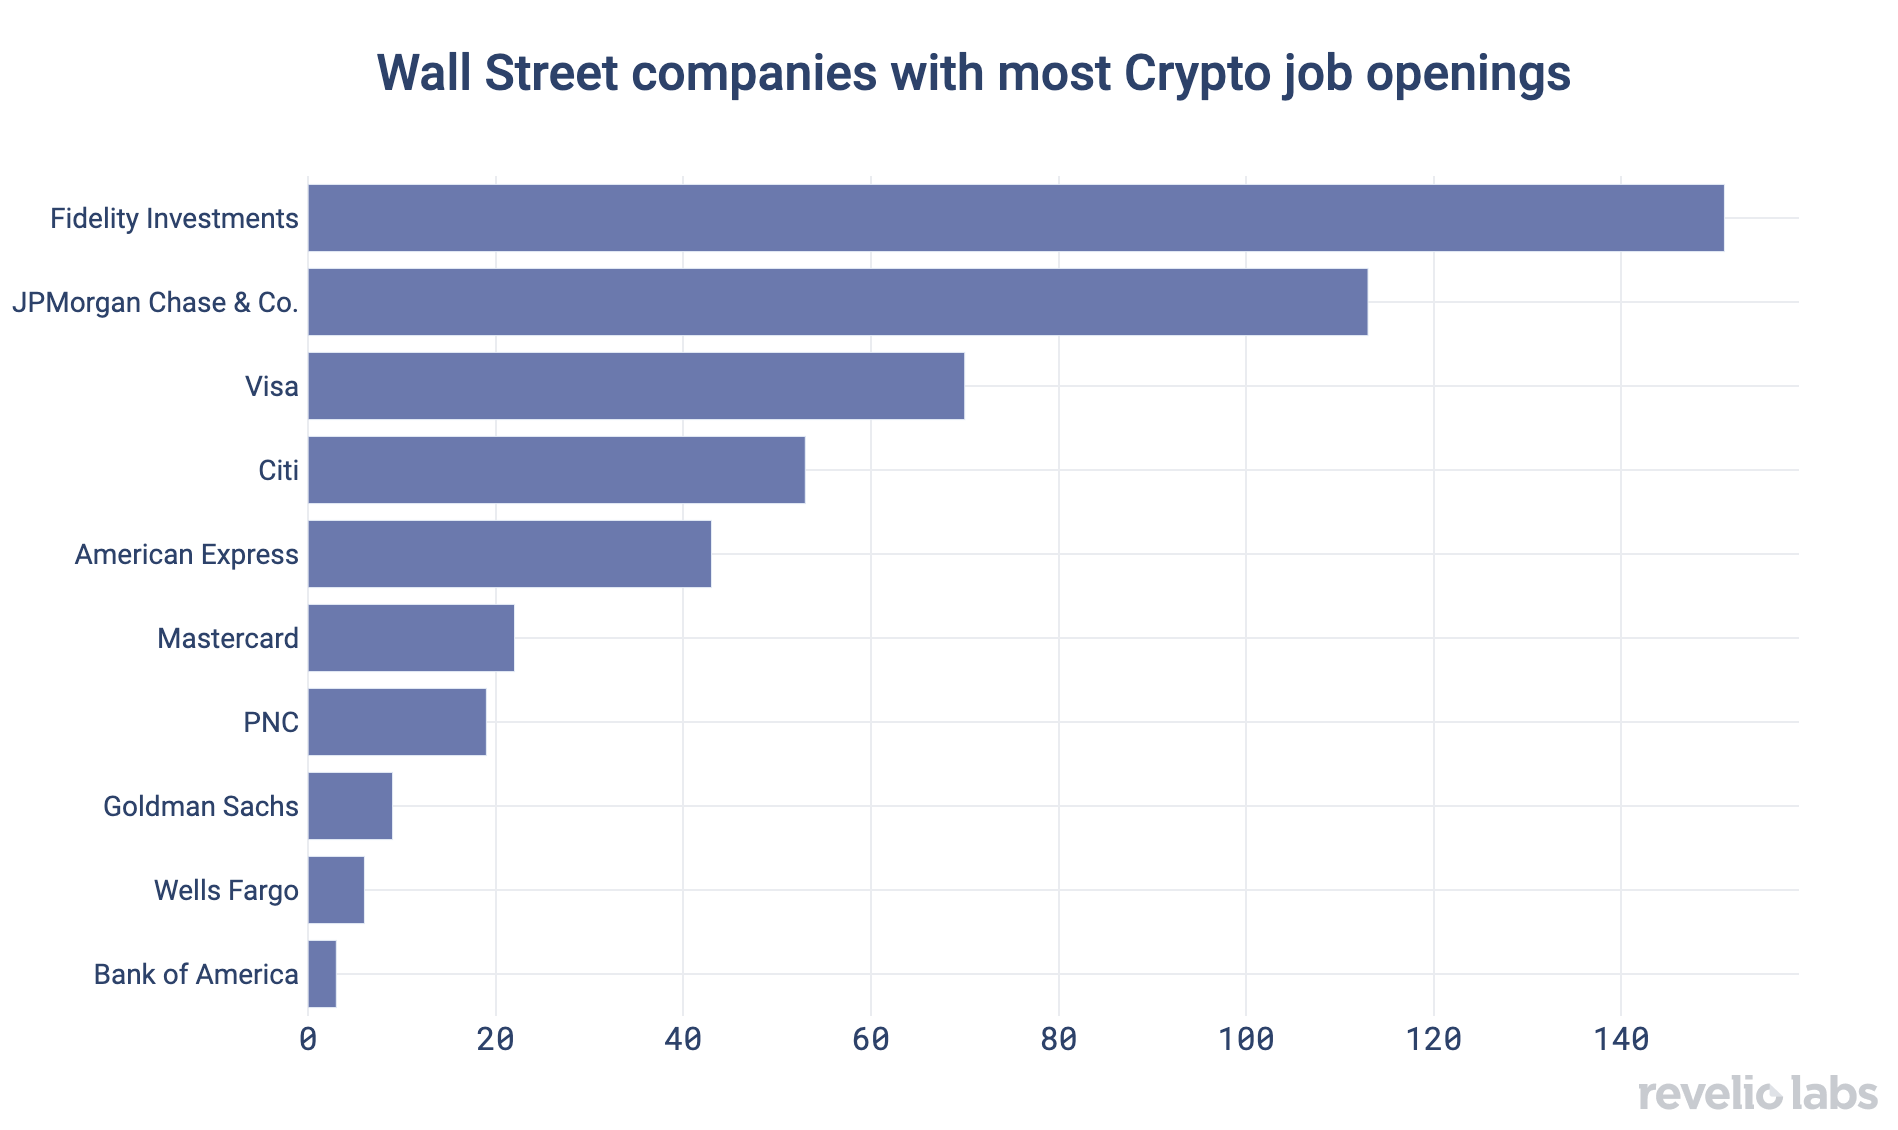 Wall Street companies with most crypto job openings